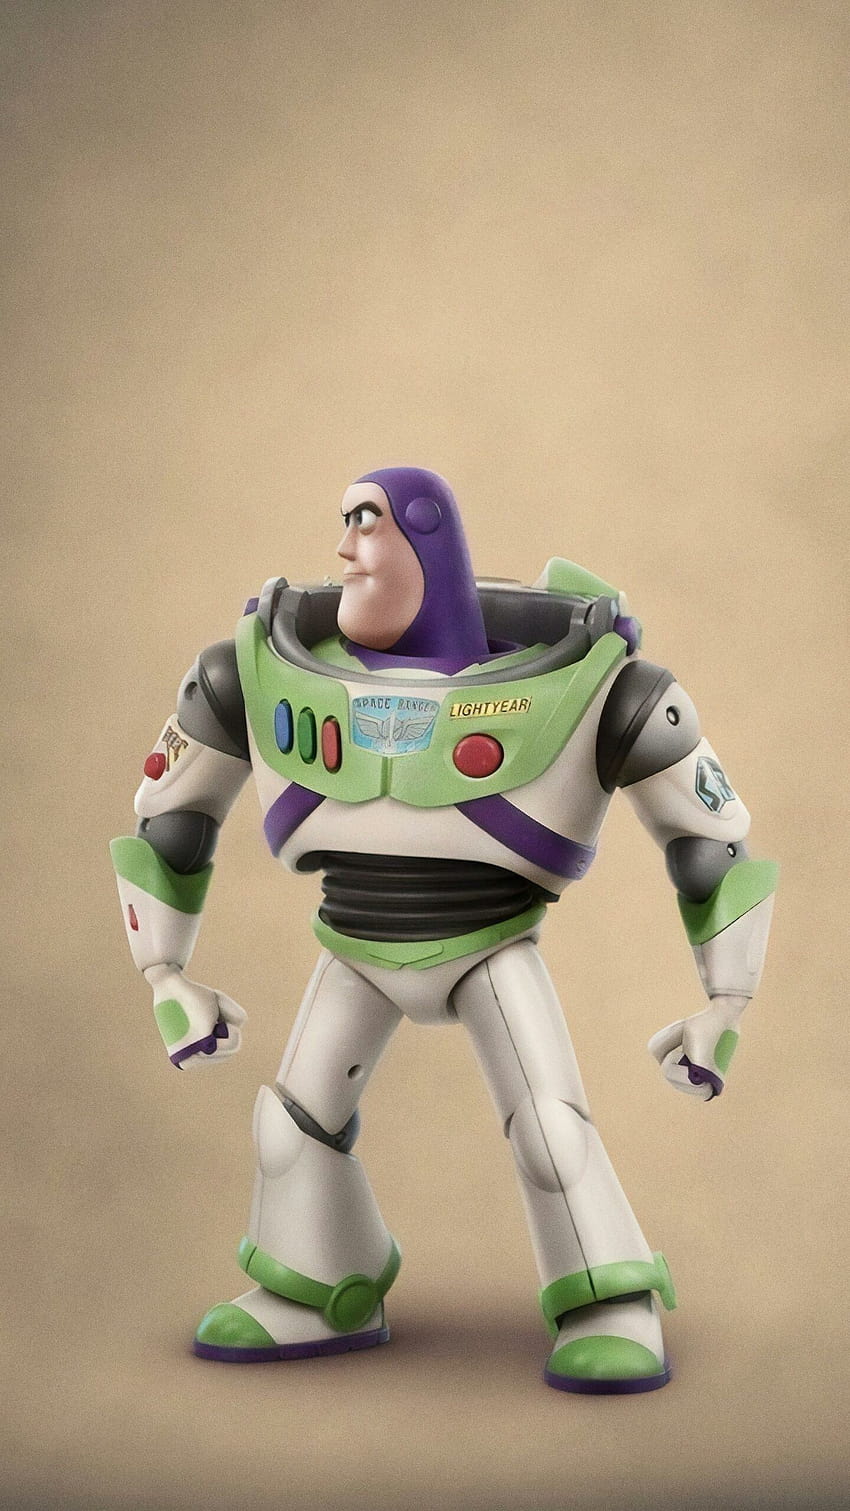 Buzz Lightyear in Toy Story 4, Movies and, pixar movies HD phone wallpaper